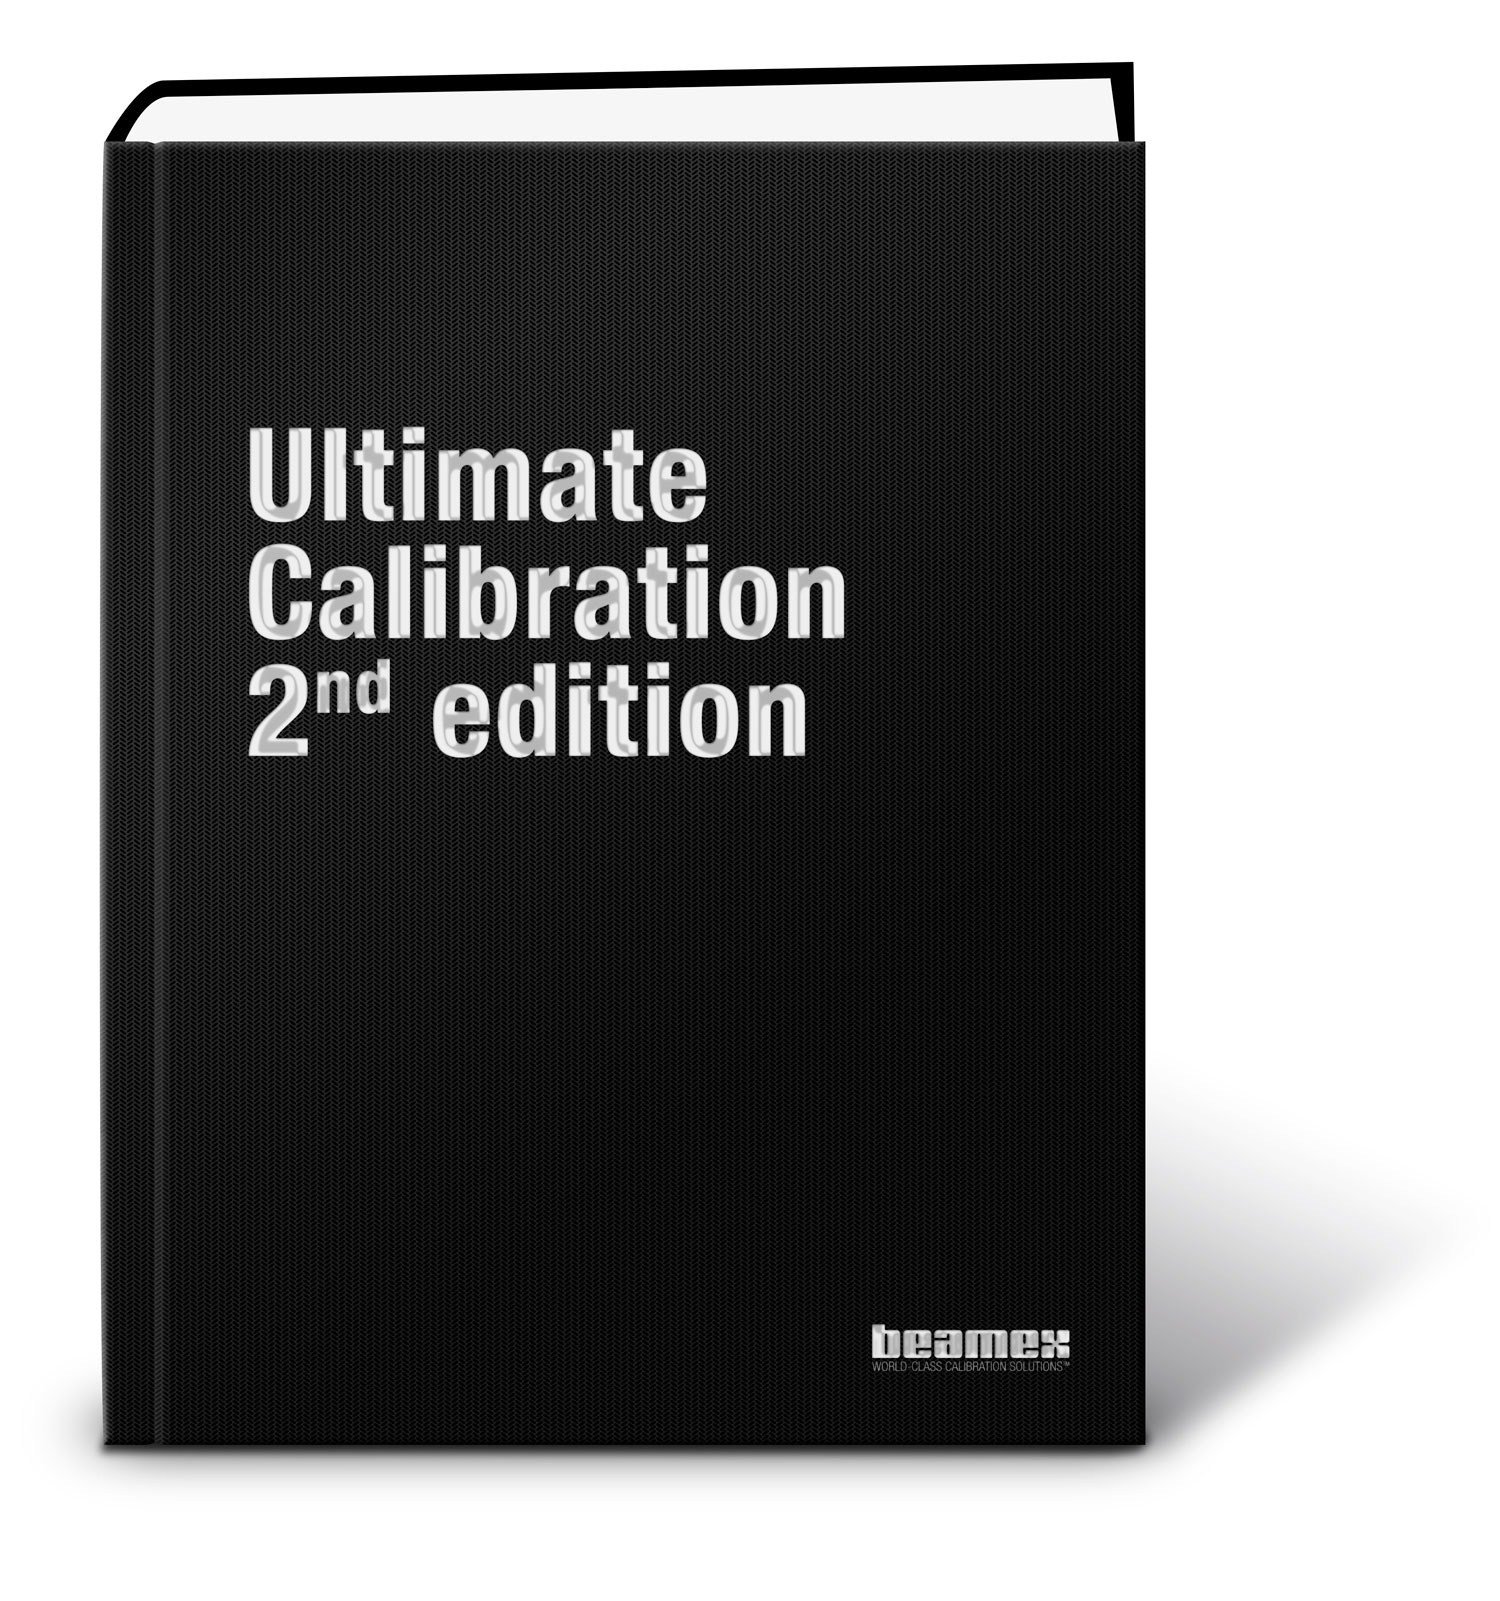 https://2203666.fs1.hubspotusercontent-na1.net/hubfs/2203666/Beamex_images/Ultimate-Calibration-book-2nd-edition-1500px-v1.jpg